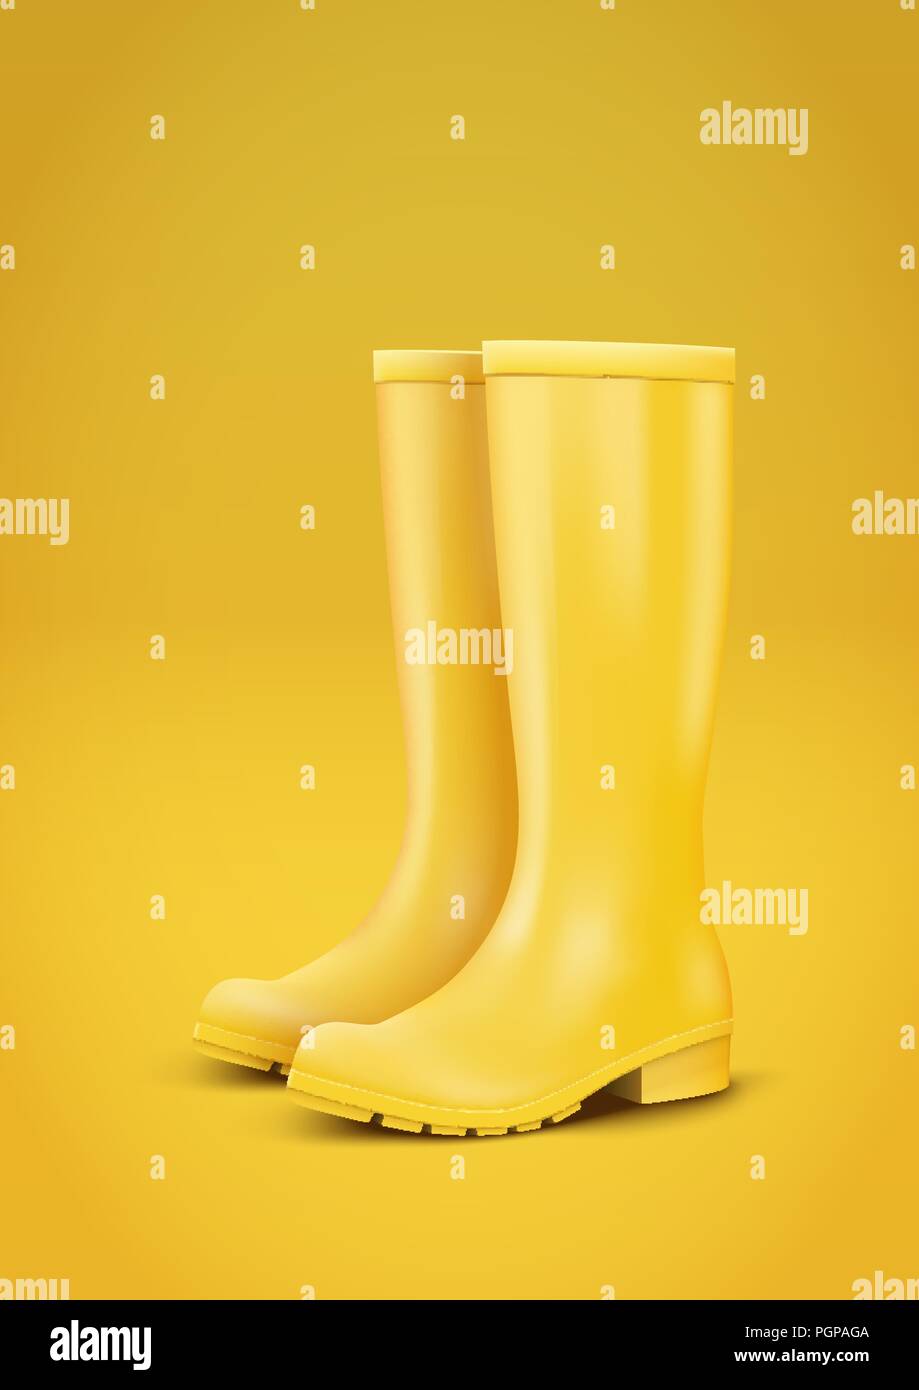 Boots Stock Vector Images - Alamy